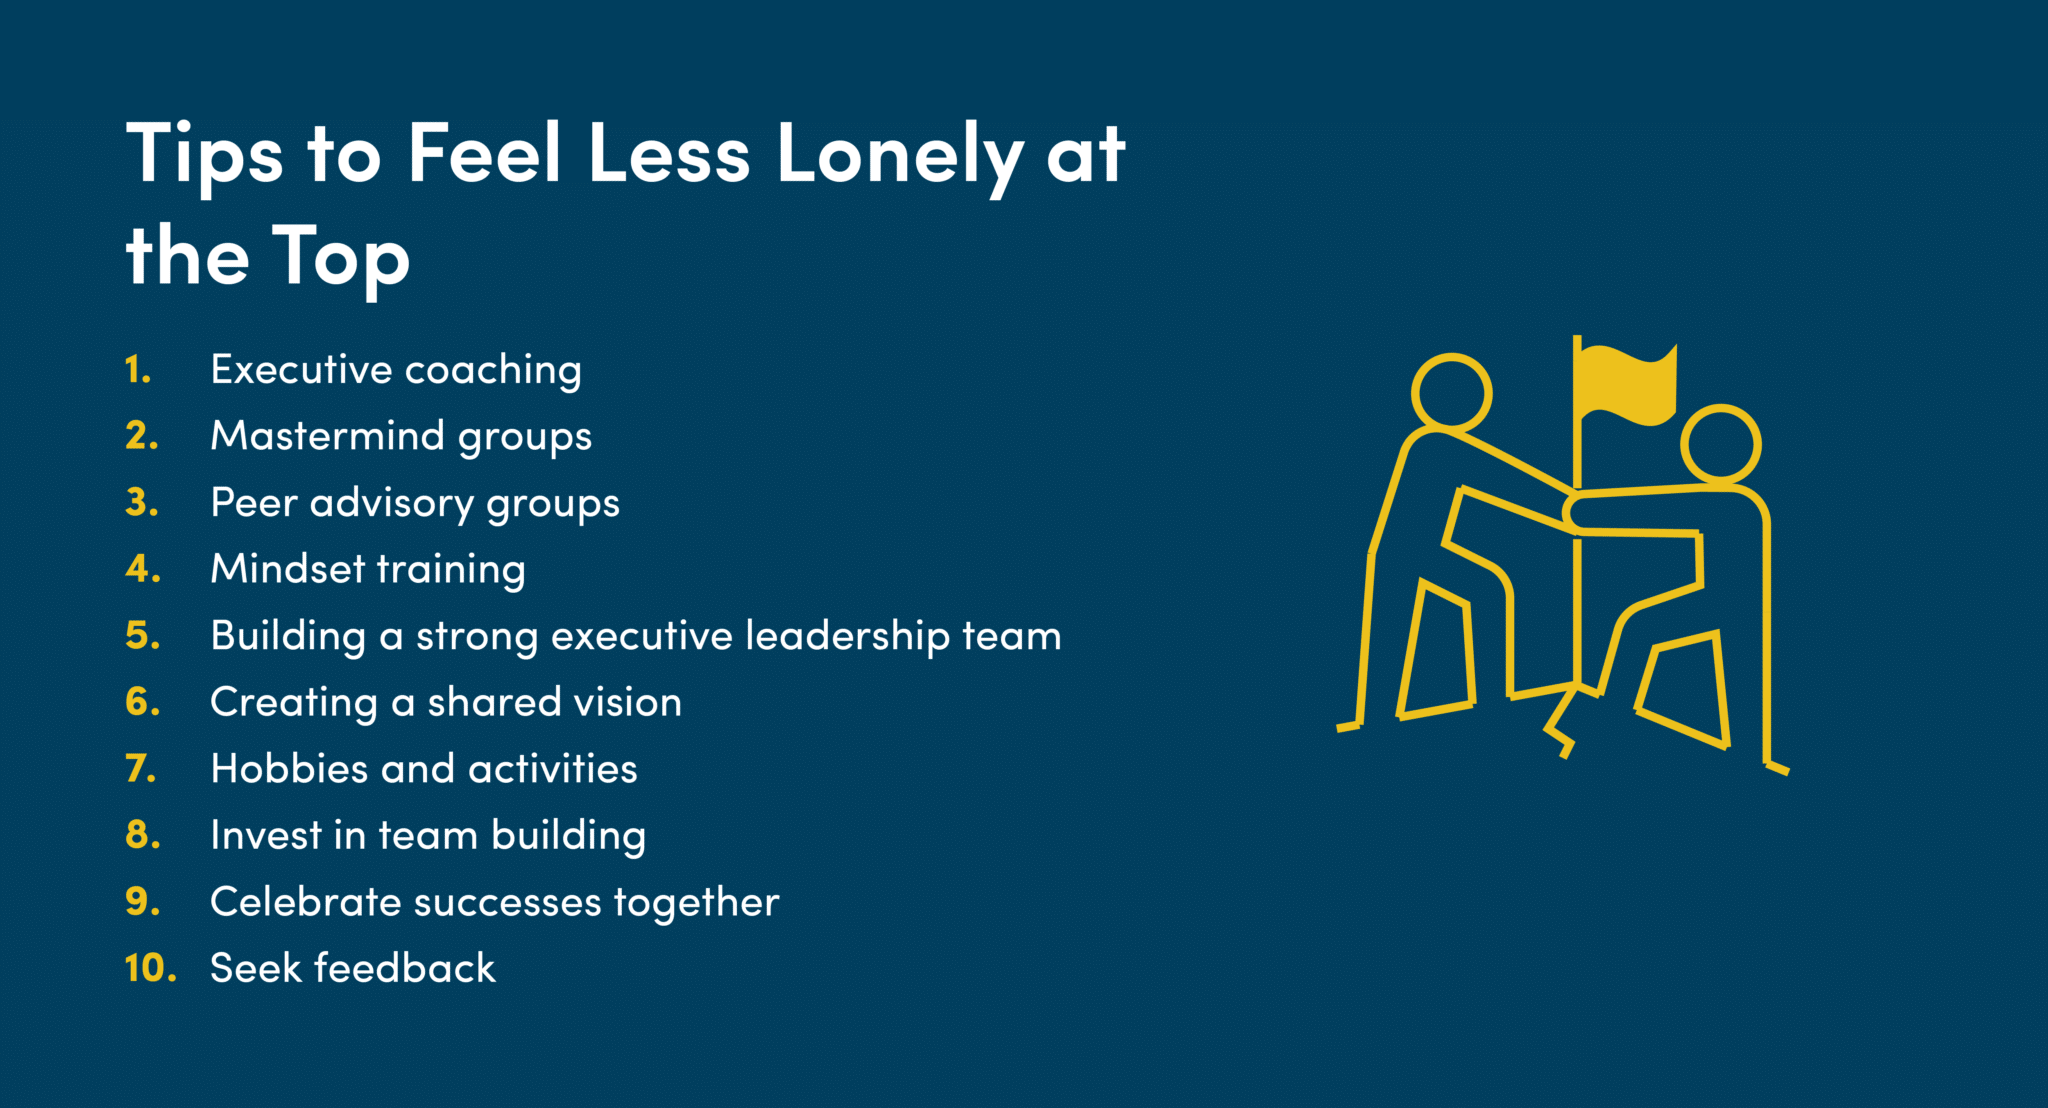 Tips to feel less lonely at the top